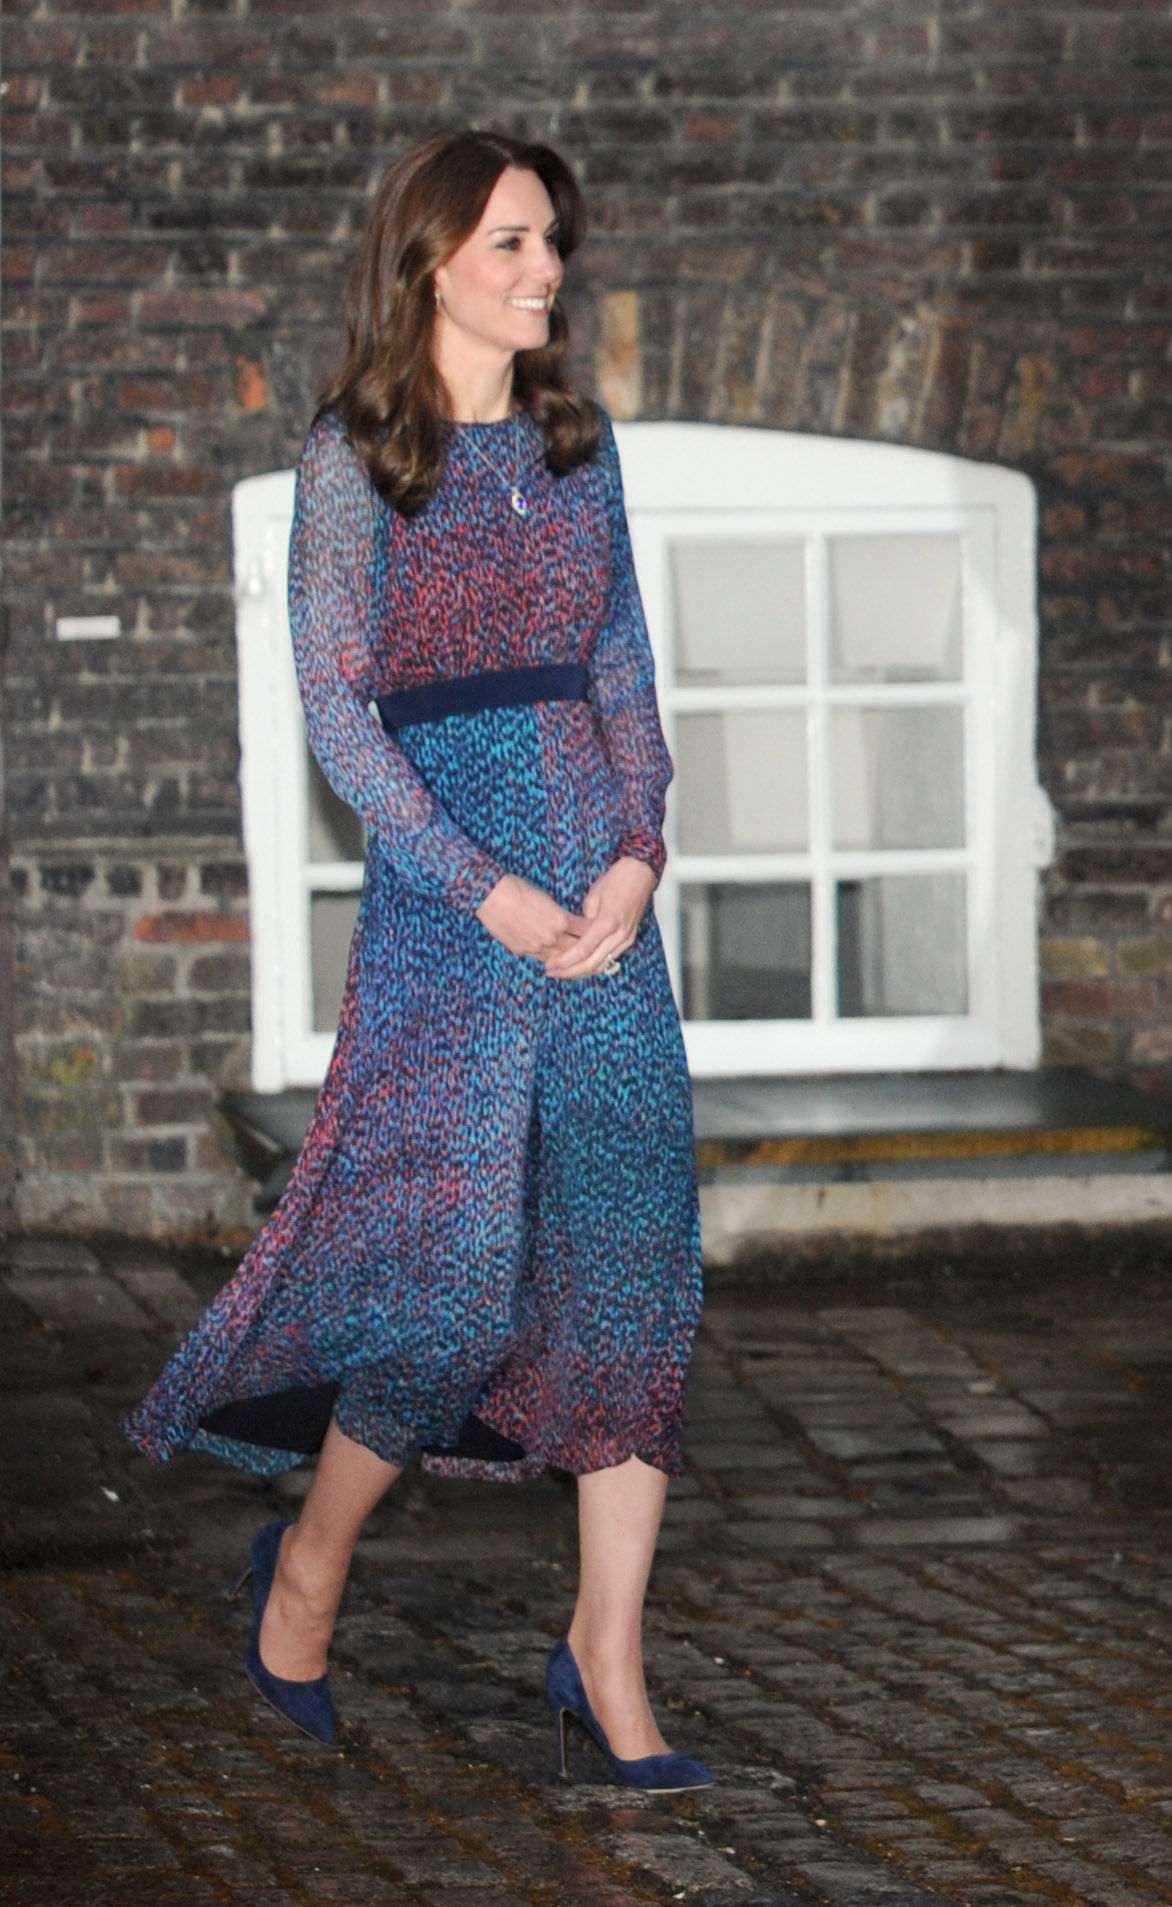 Kate Middleton Wore a Printed L.K. Bennett Dress to Meet 